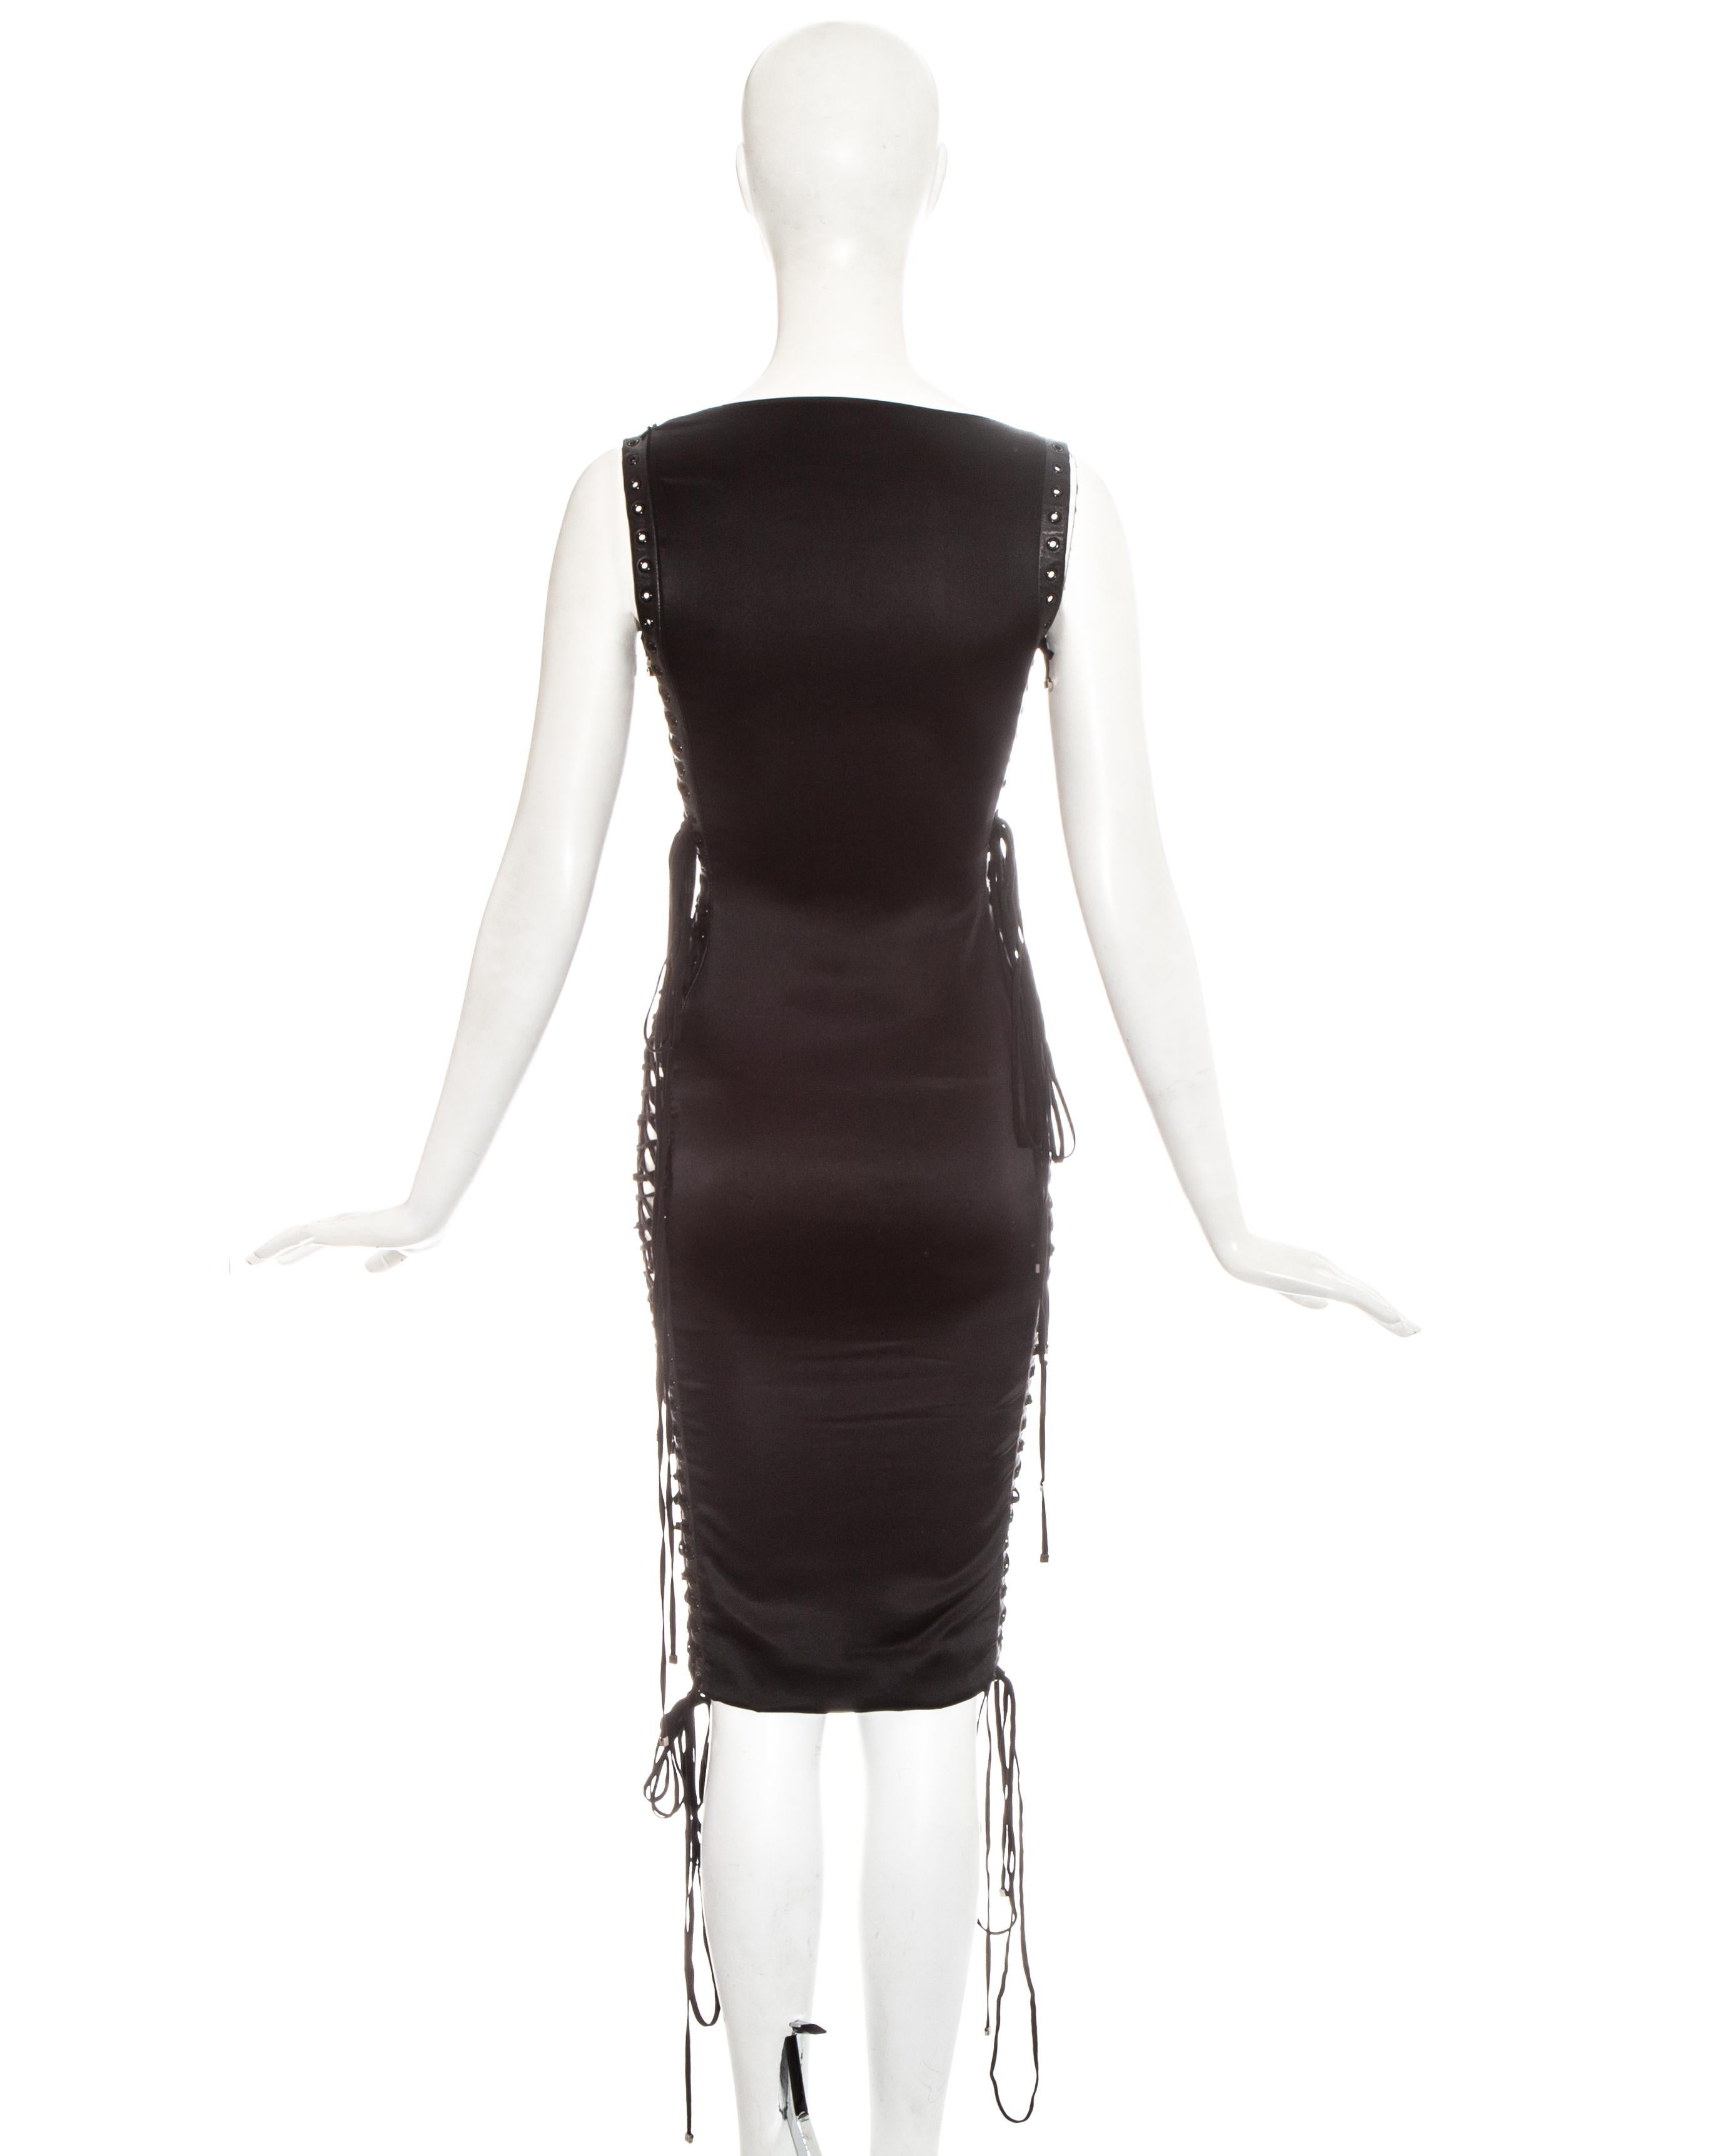 Dolce & Gabbana black silk spandex and leather lace up dress, ss 2003 For Sale 4